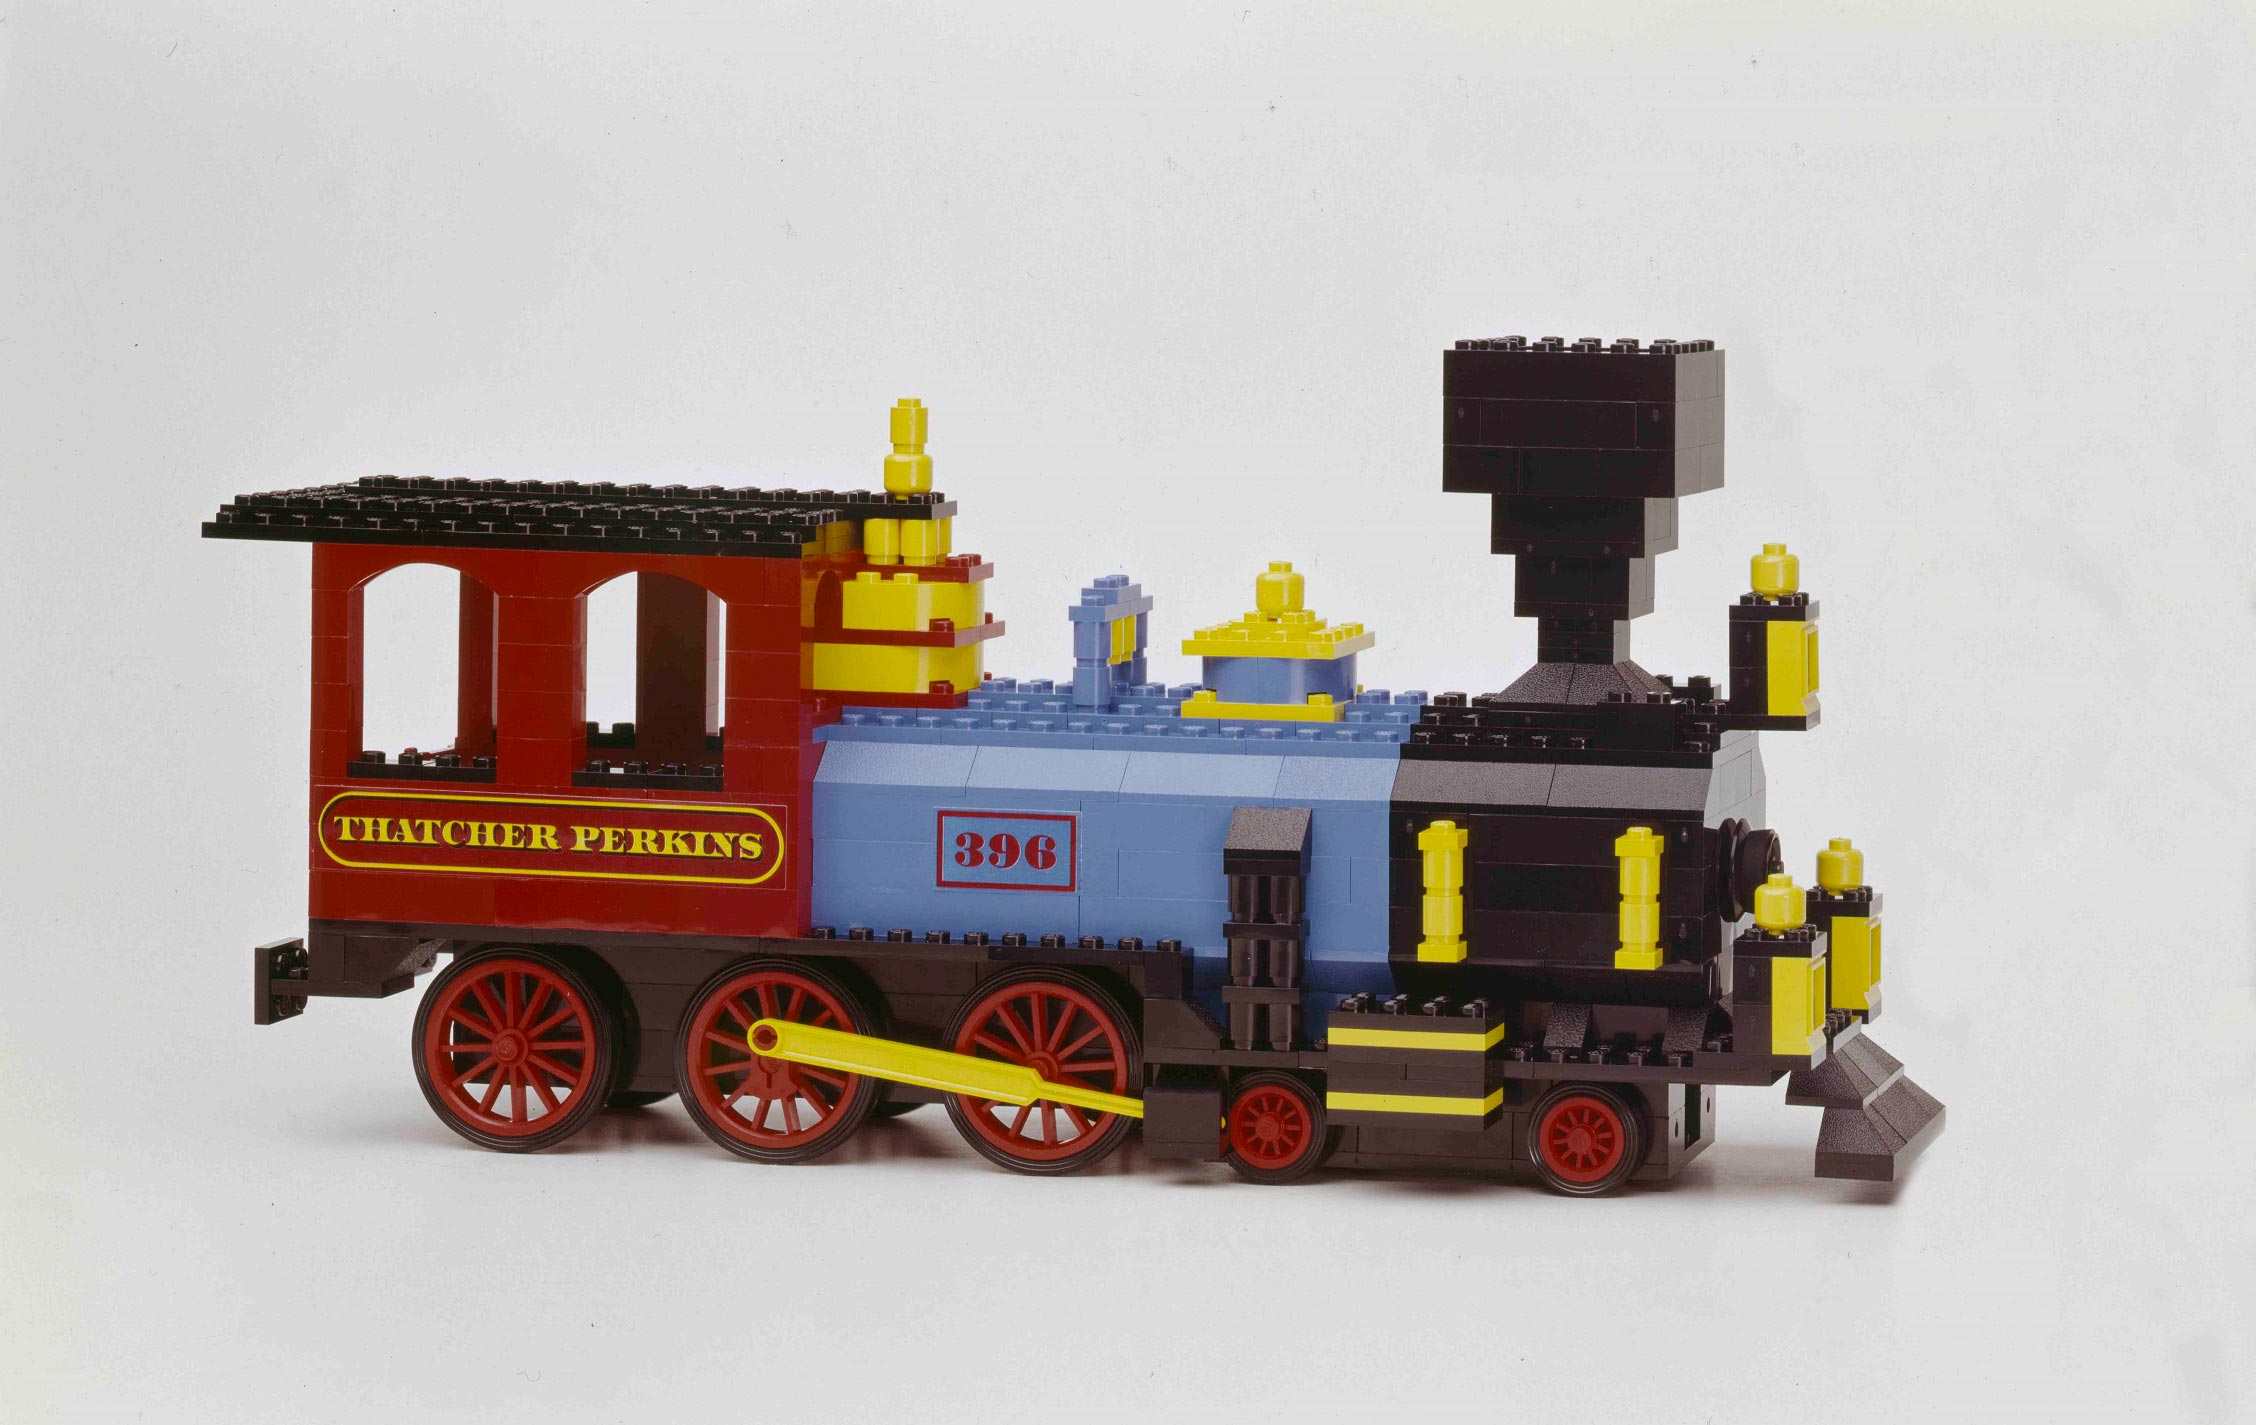 LEGO City 8X8 Stop That Train – AG LEGO® Certified Stores